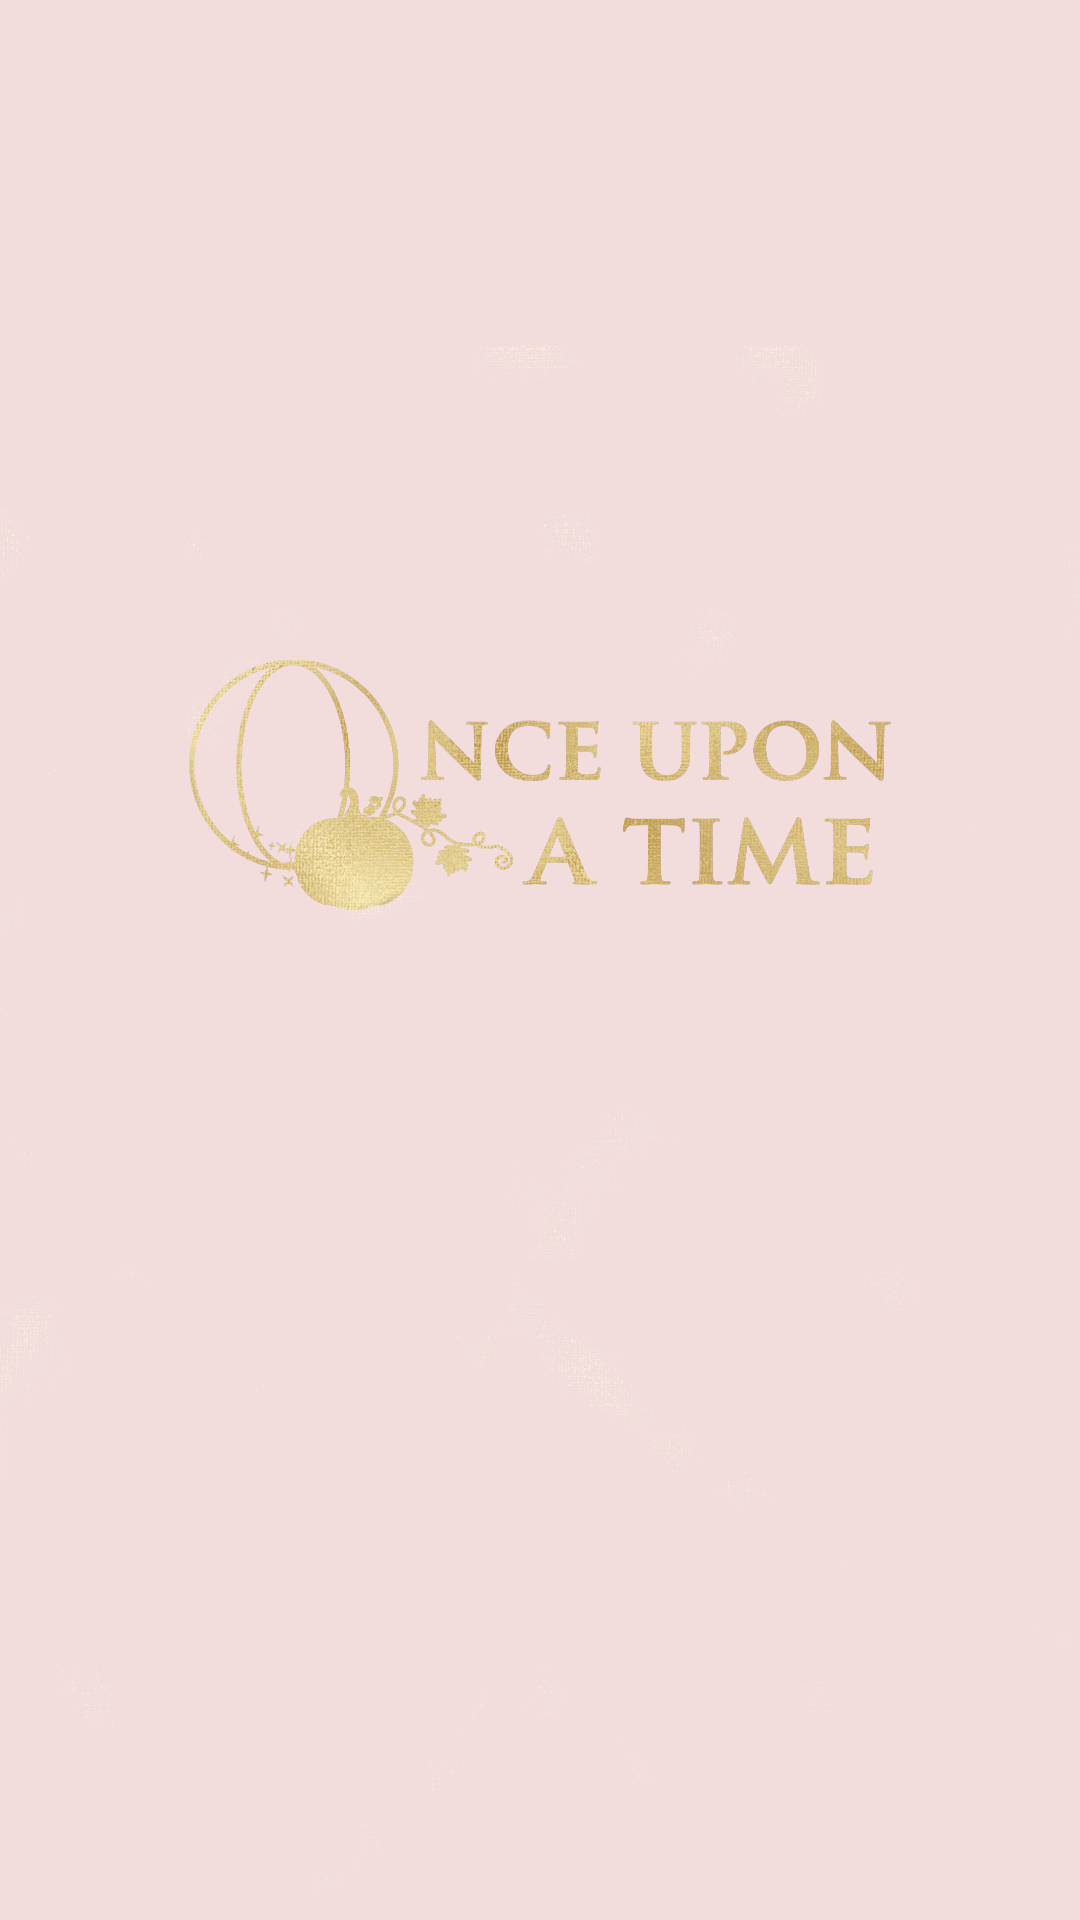 Cute Disney Once Upon A Time Background